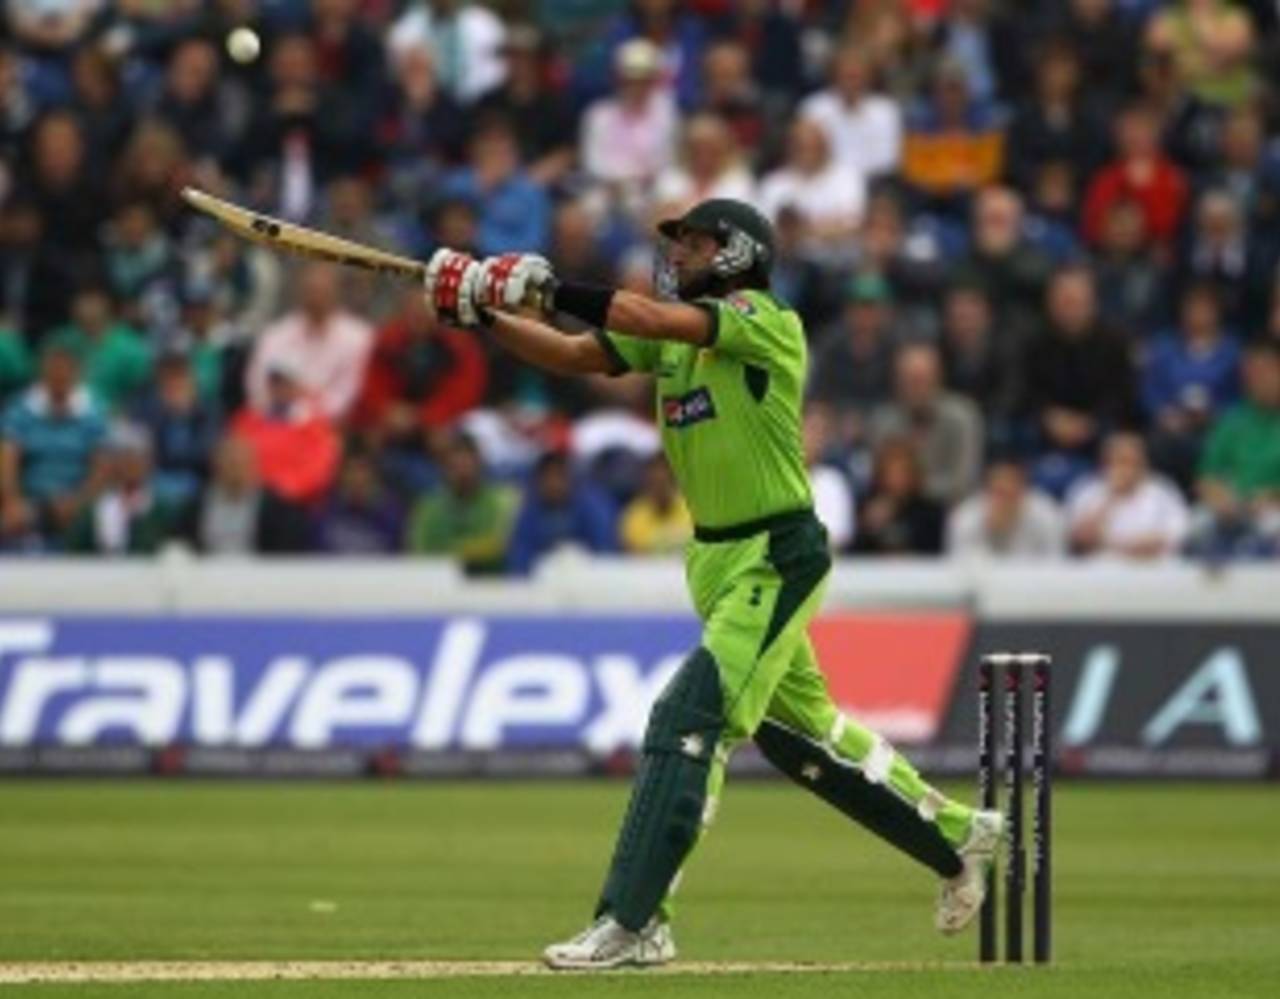 Shahid Afridi was pleased to get playing cricket even though the spot-fixing controversy continued to rage&nbsp;&nbsp;&bull;&nbsp;&nbsp;Getty Images